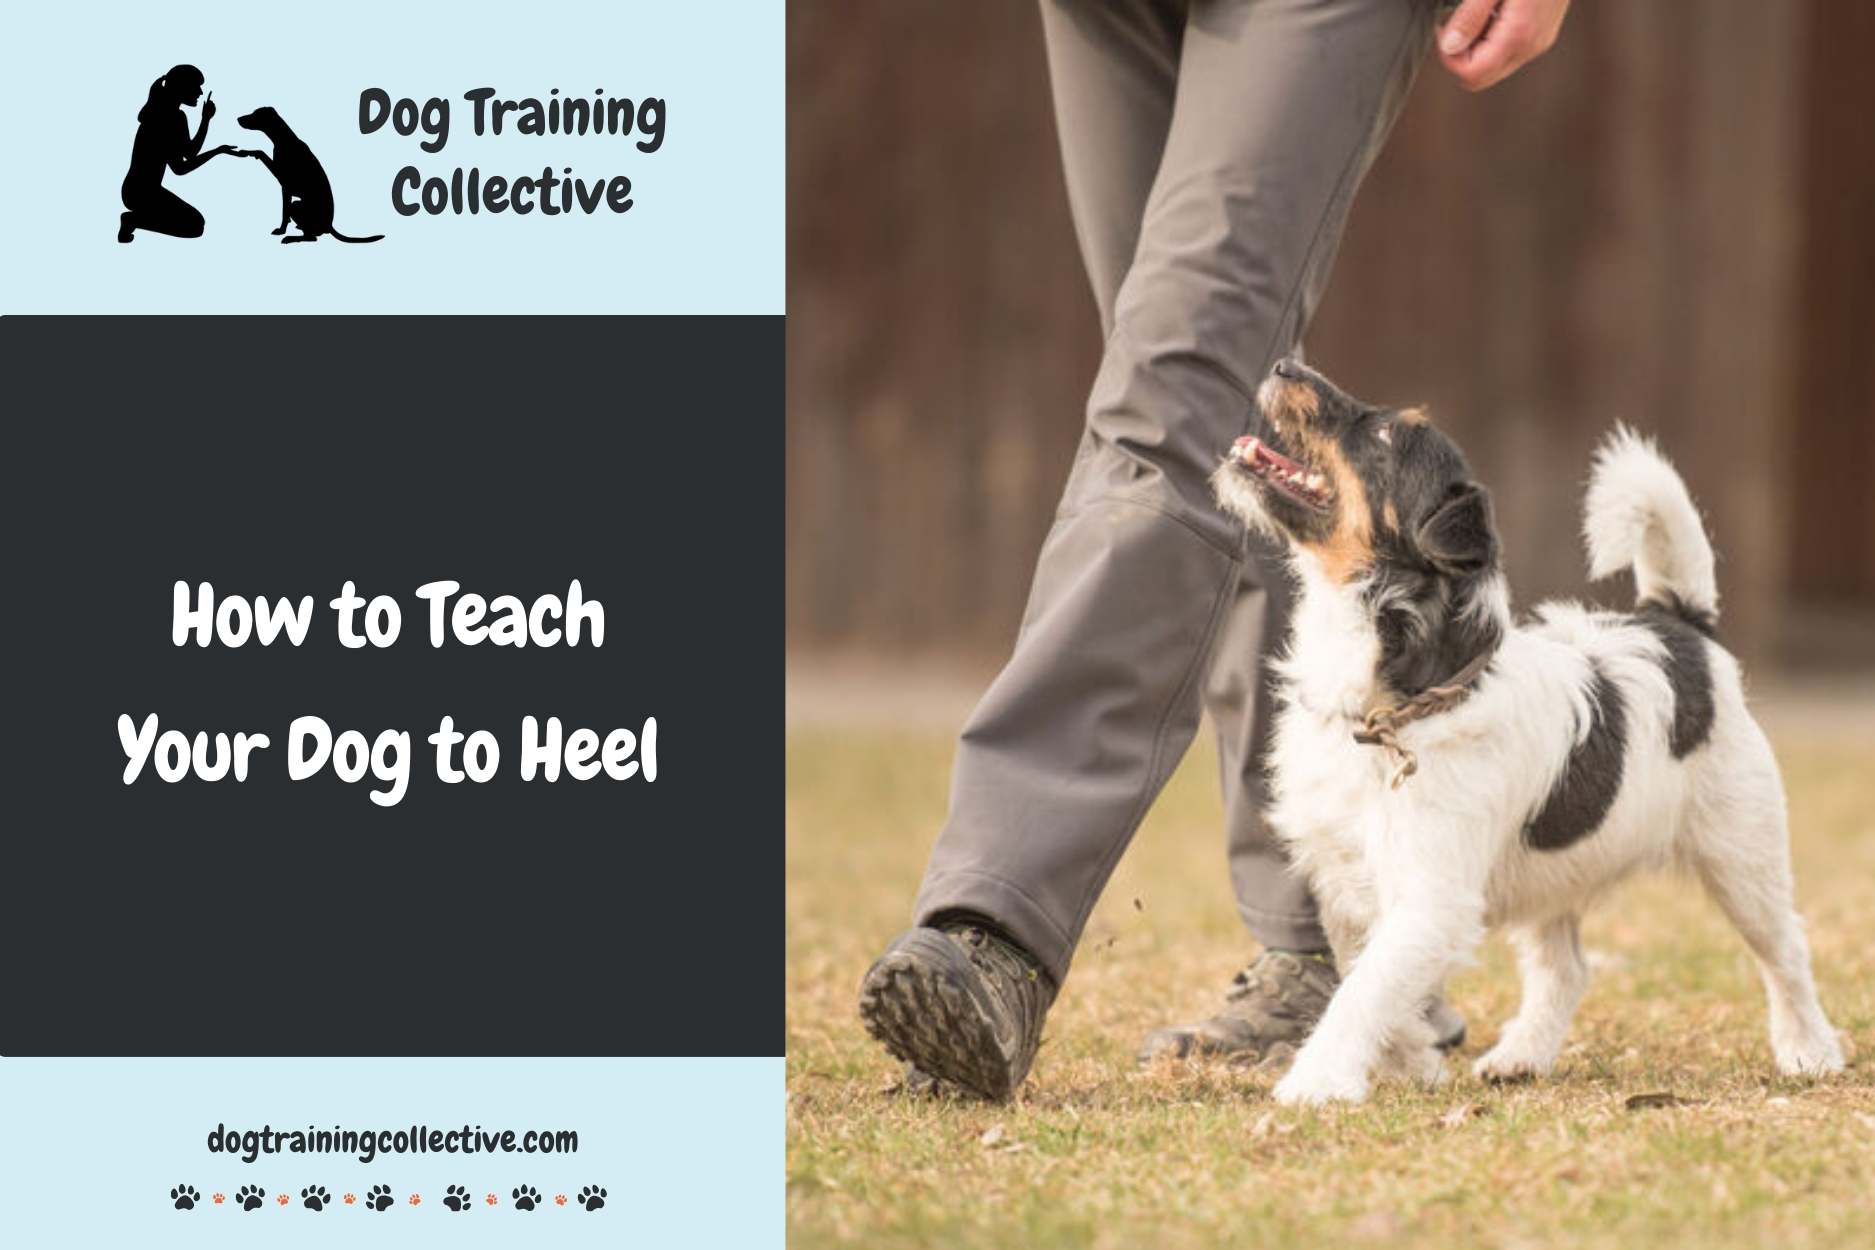 How to Teach Your Dog to Heel